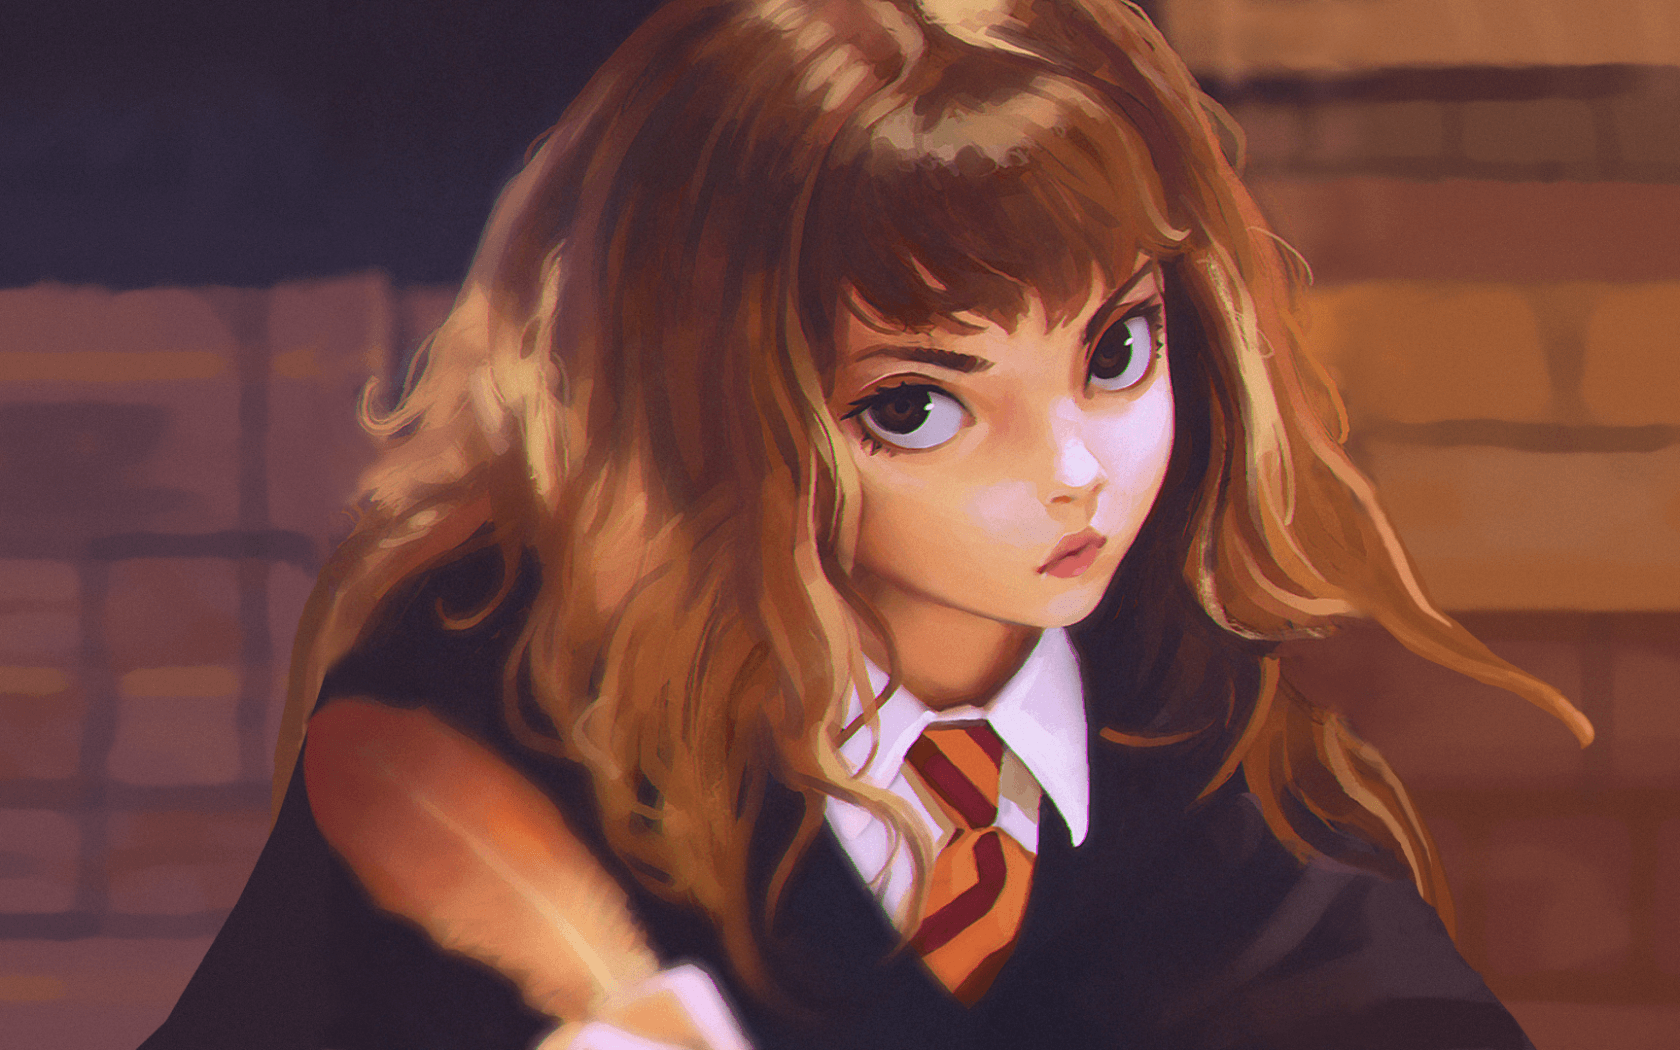 Download 1680x1050 Hermione Granger, Anime Style, Harry